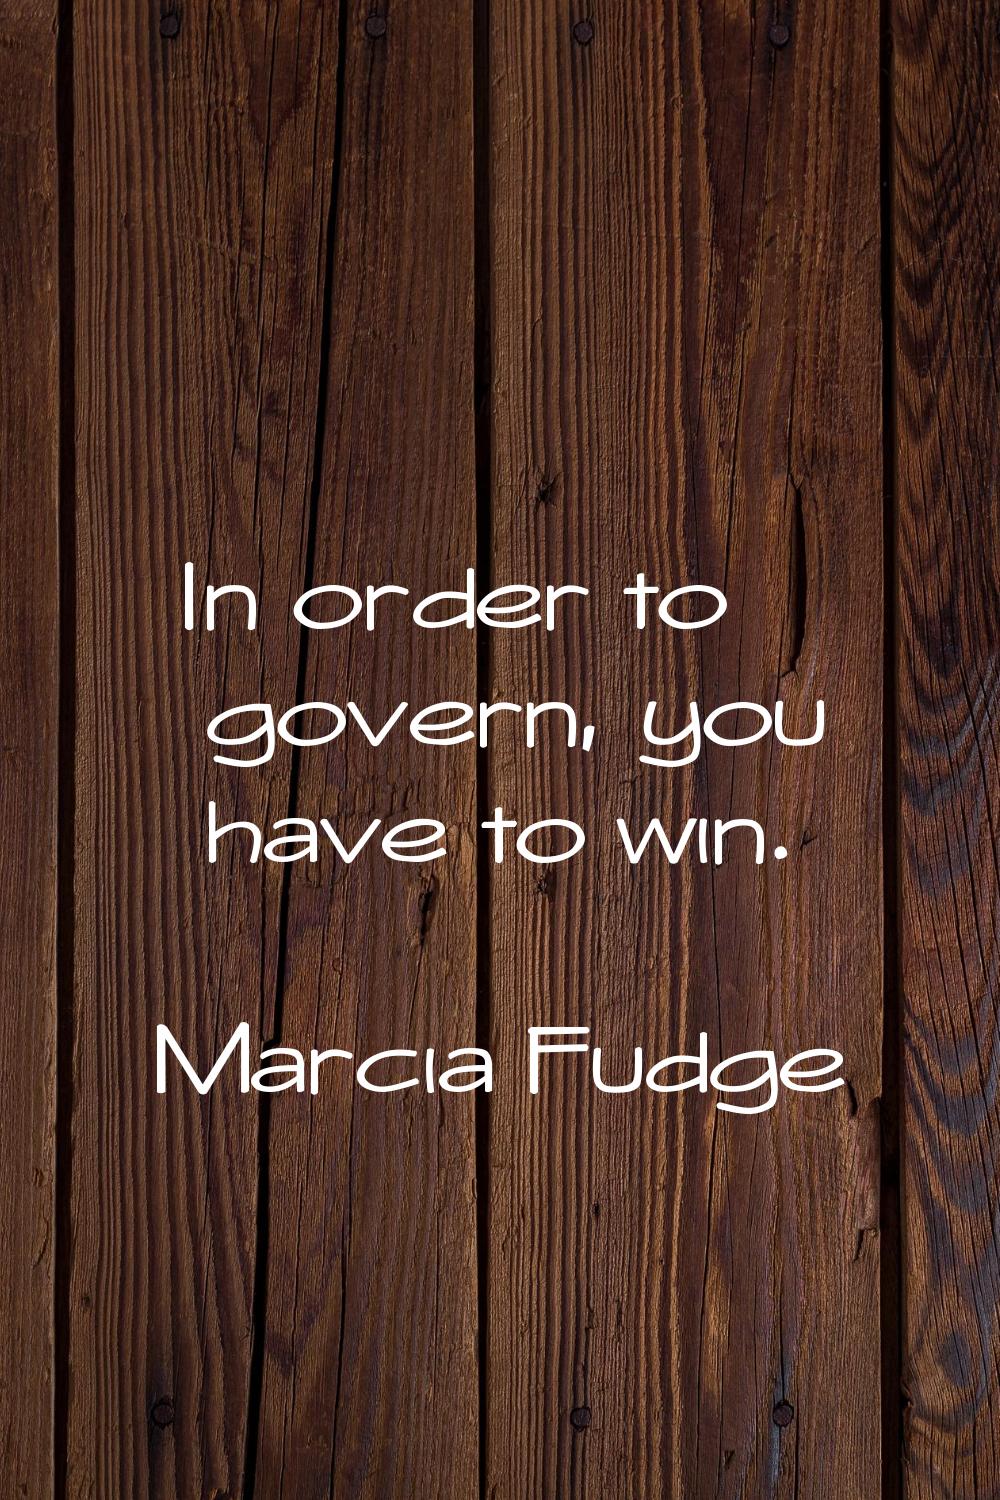 In order to govern, you have to win.